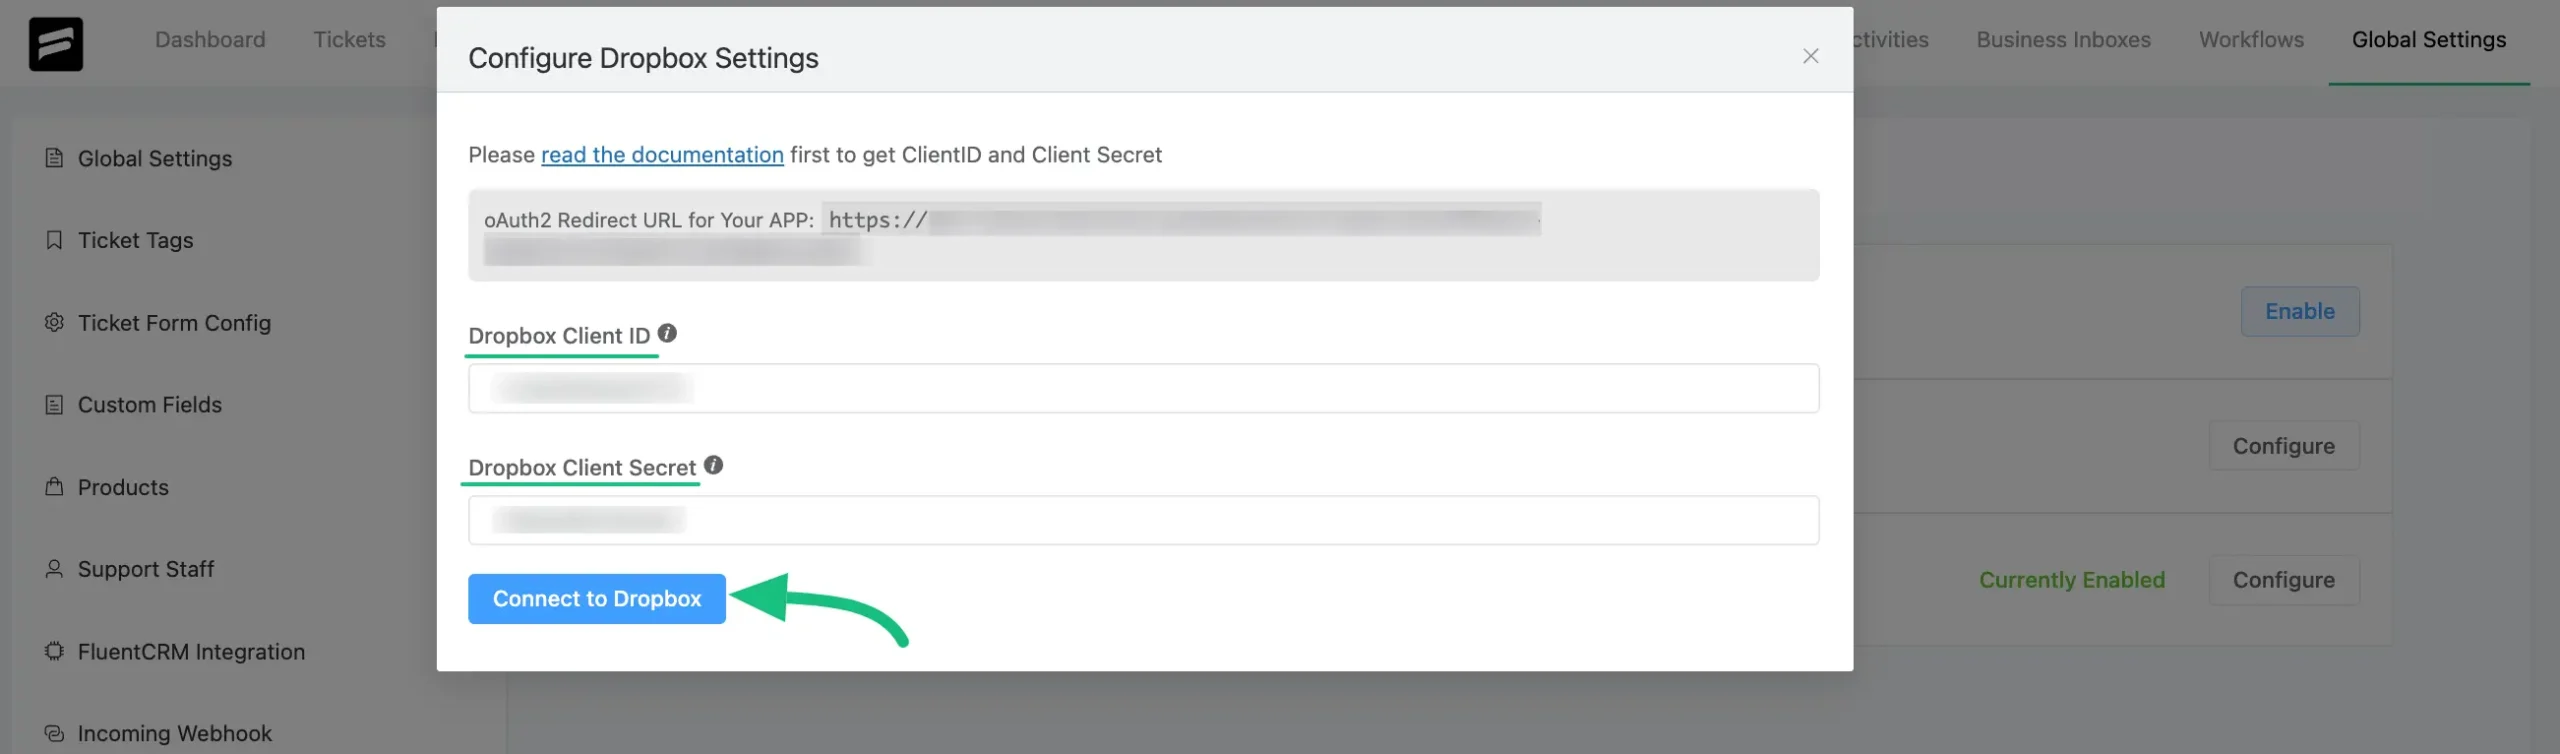 Client ID, Client Secret and Connect to Dropbox options